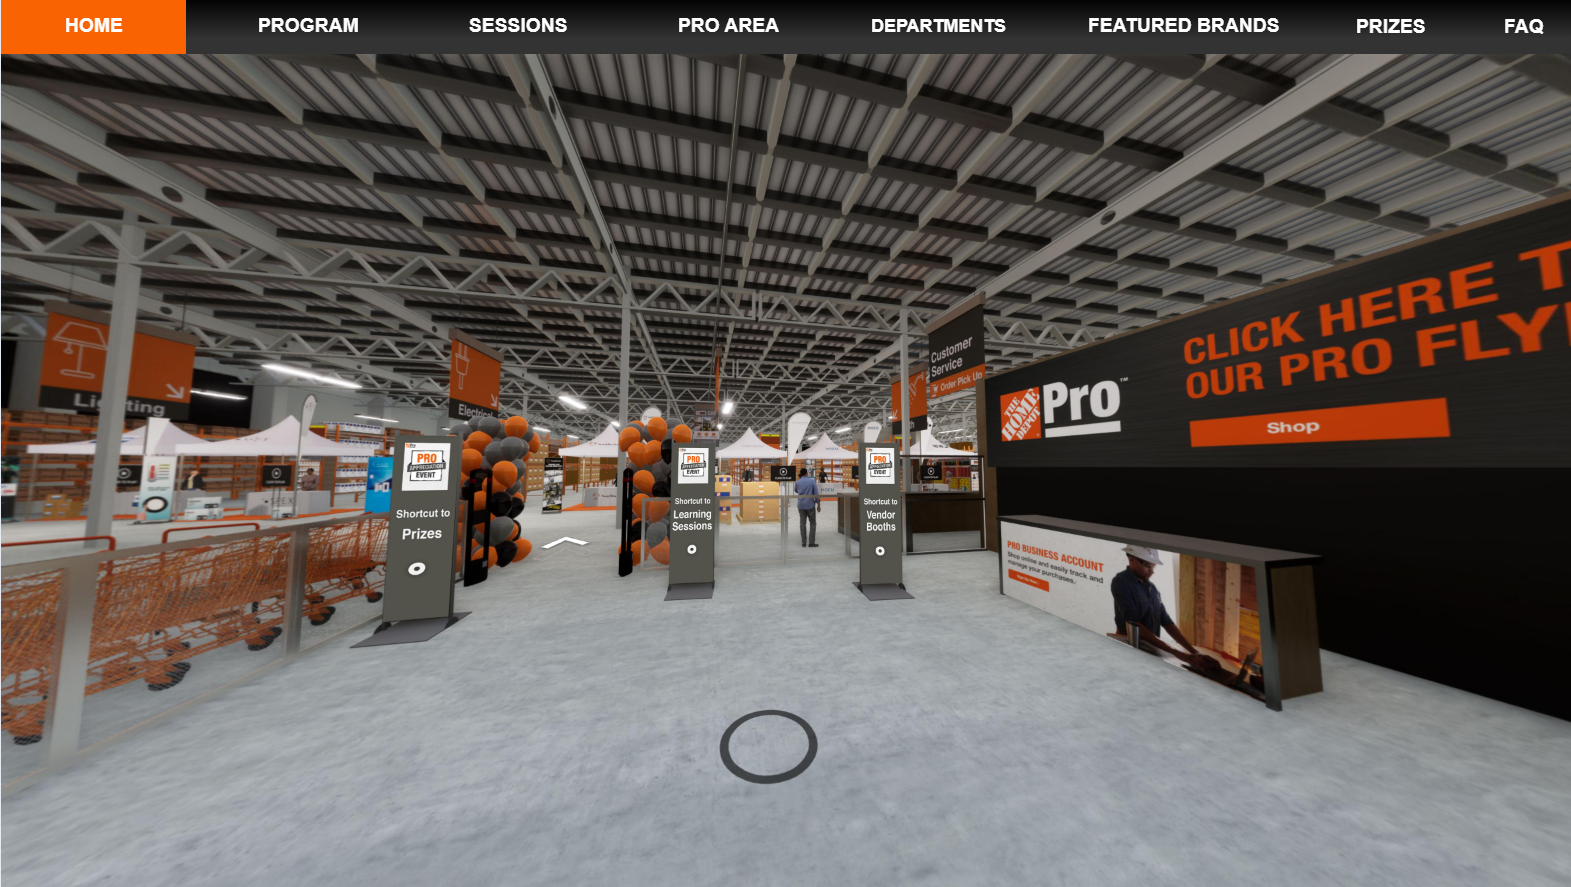 A virtual room simulating a Home Depot store